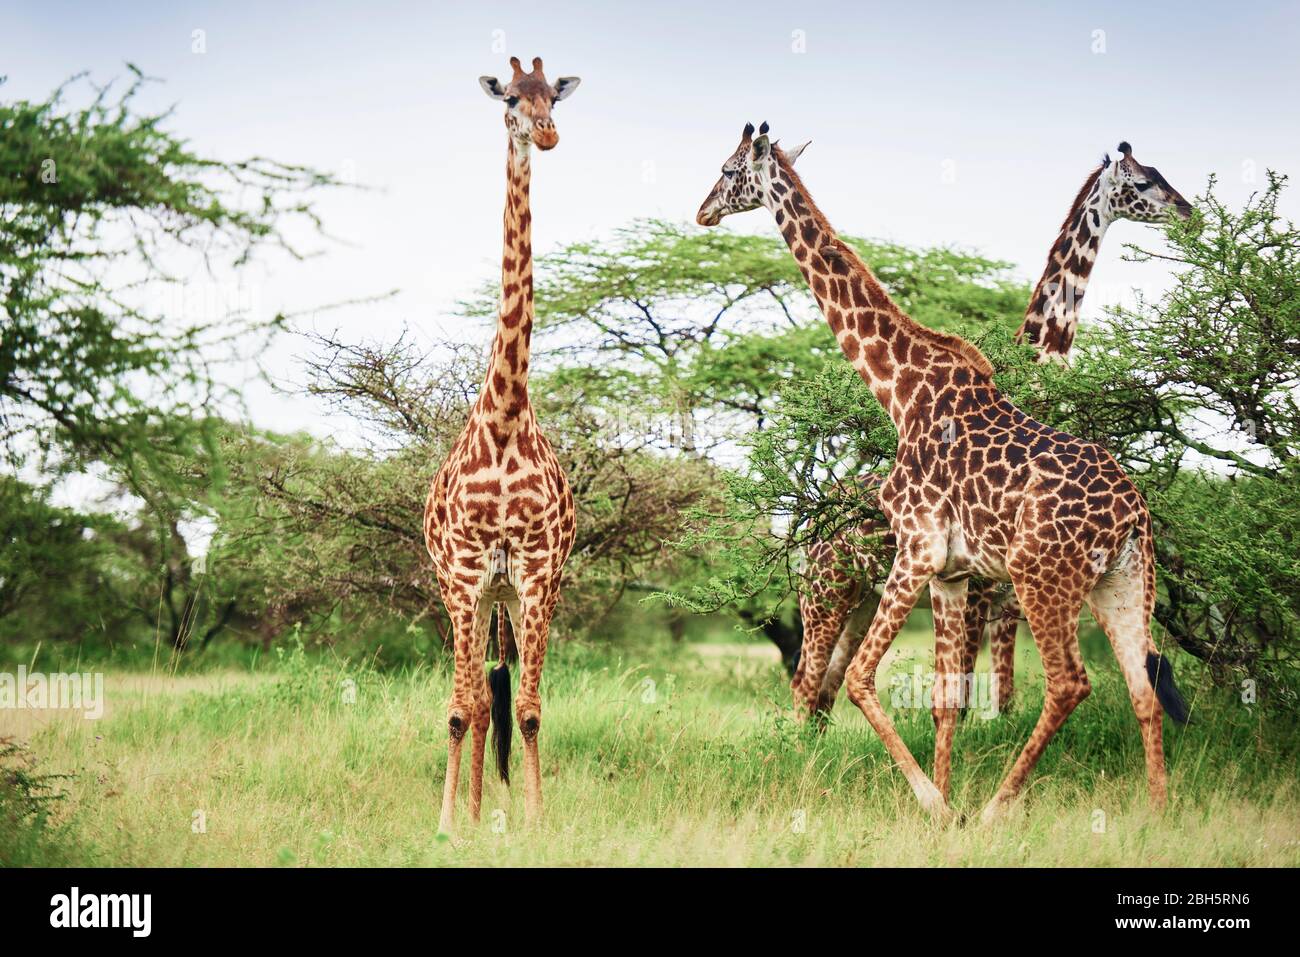 Group of giraffes in Africa Stock Photo